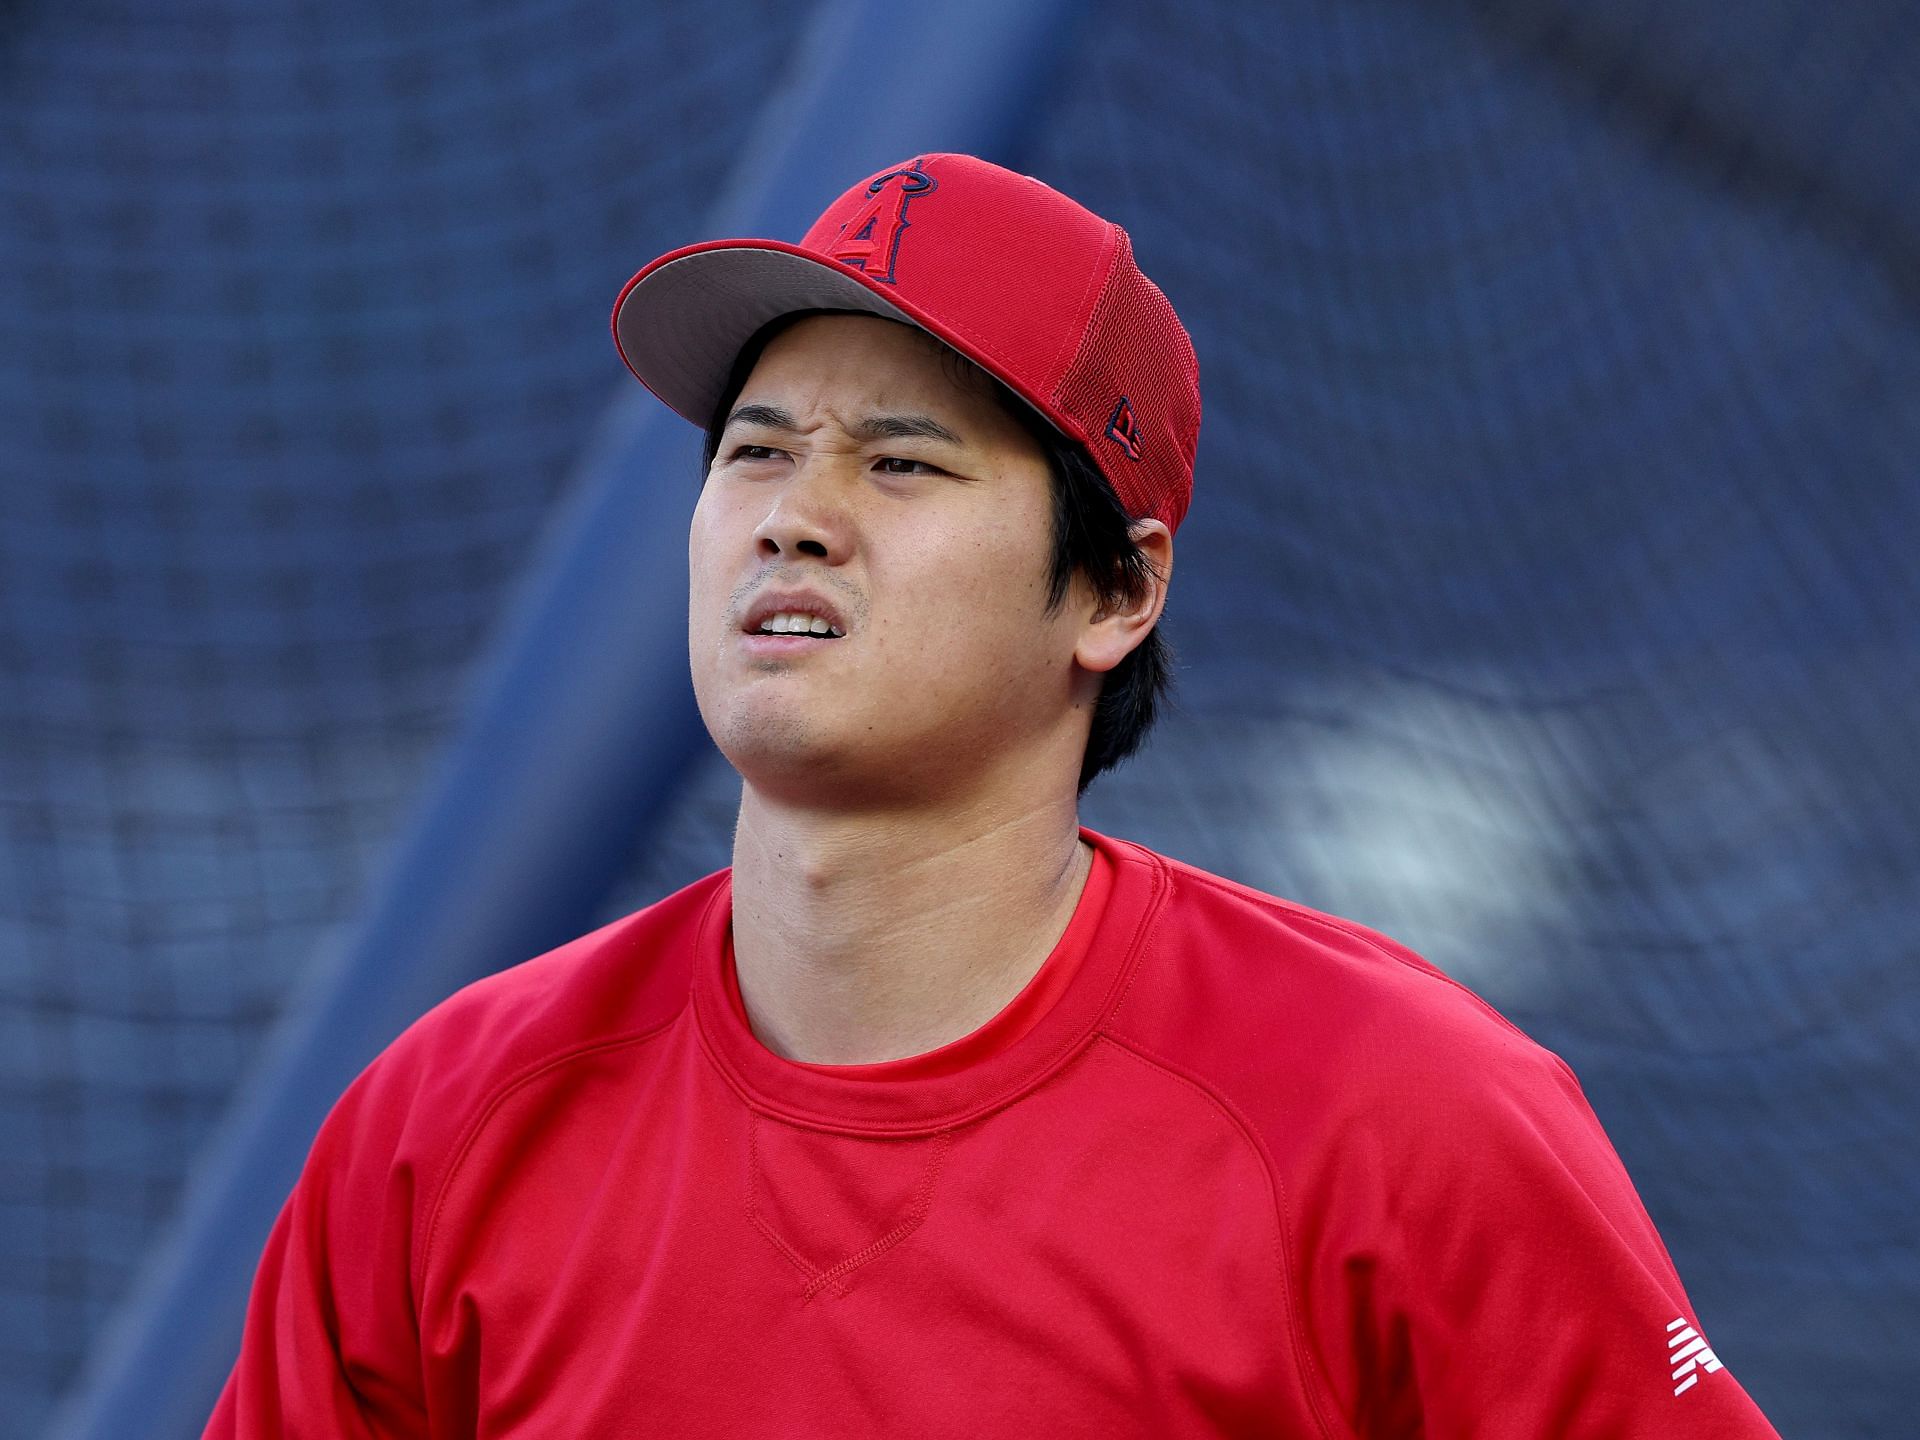 Shohei Ohtani of the Los Angeles Angels looks on during batting practice.